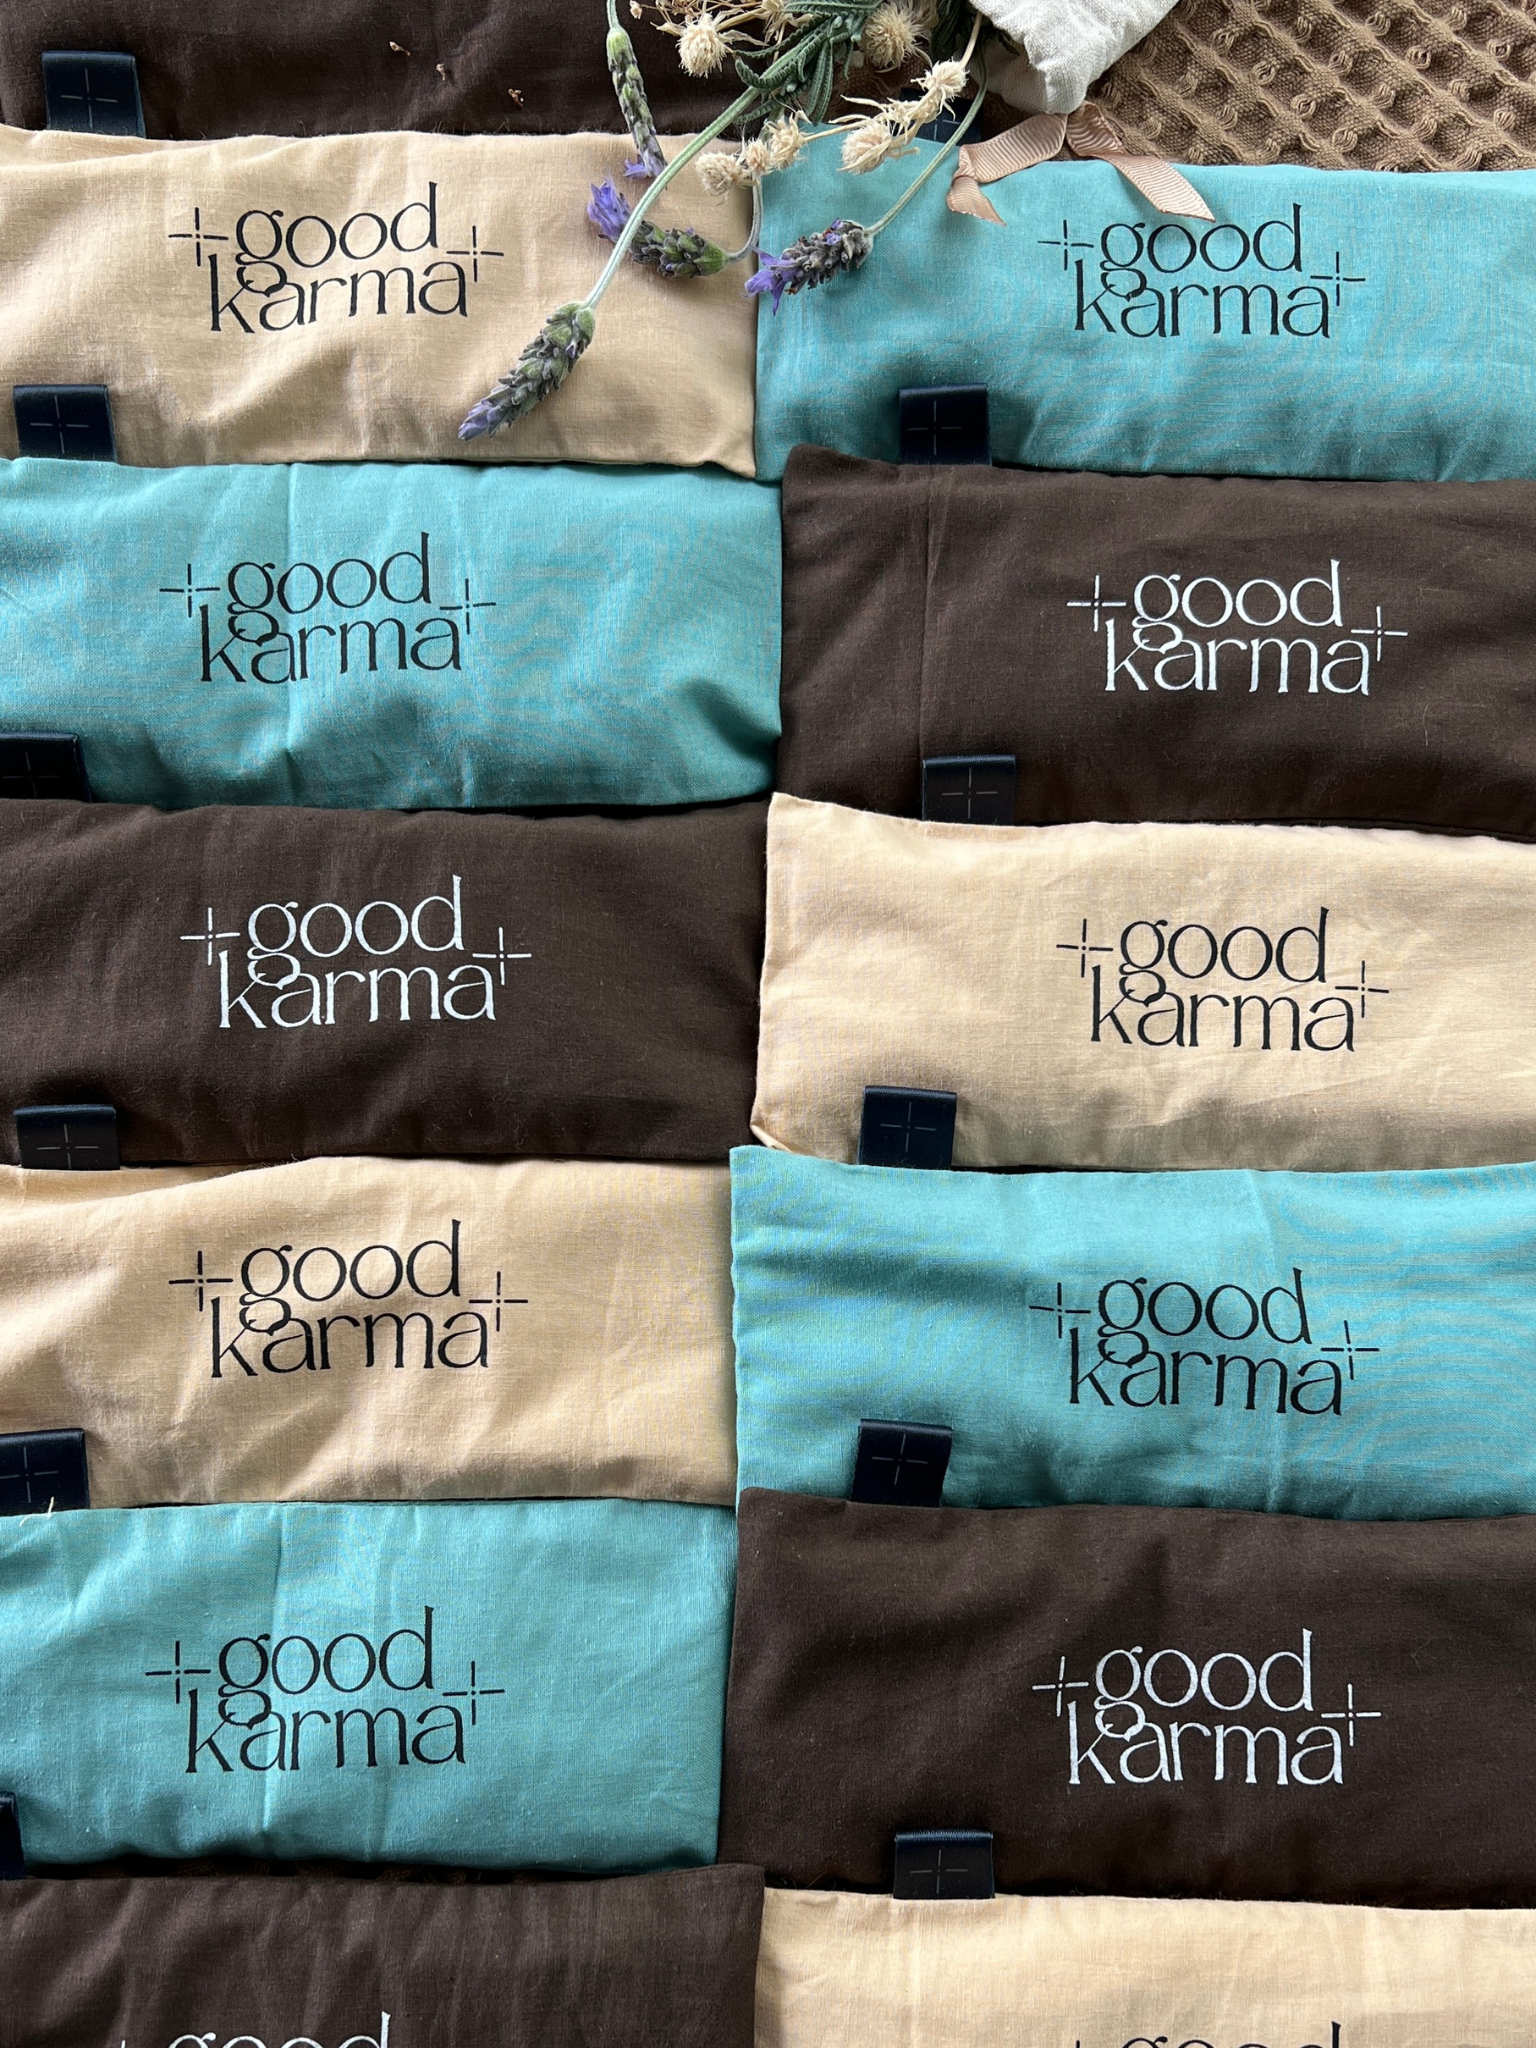 Good Karma organic flax and lavender eye pillows for meditation and relaxation 3 colors - sand beige dark chocolate brown and green aqua many eye pillows masks different colors together